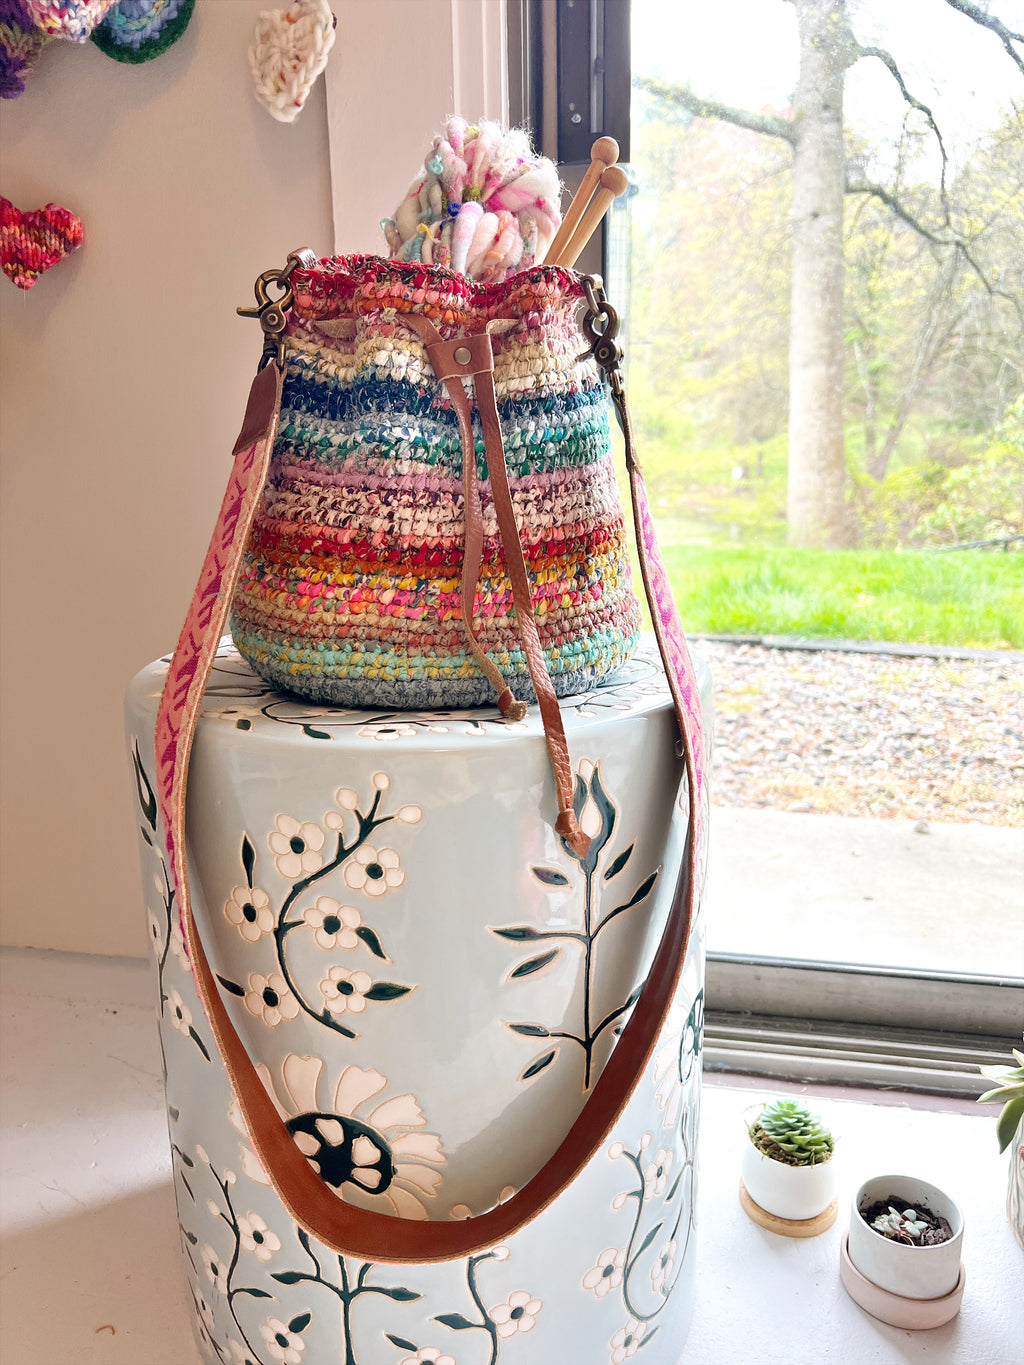 Menulis Crochet Bucket Bag | Vegan, Ethically Made & Sustainable | (Multi) by The Knotty Ones